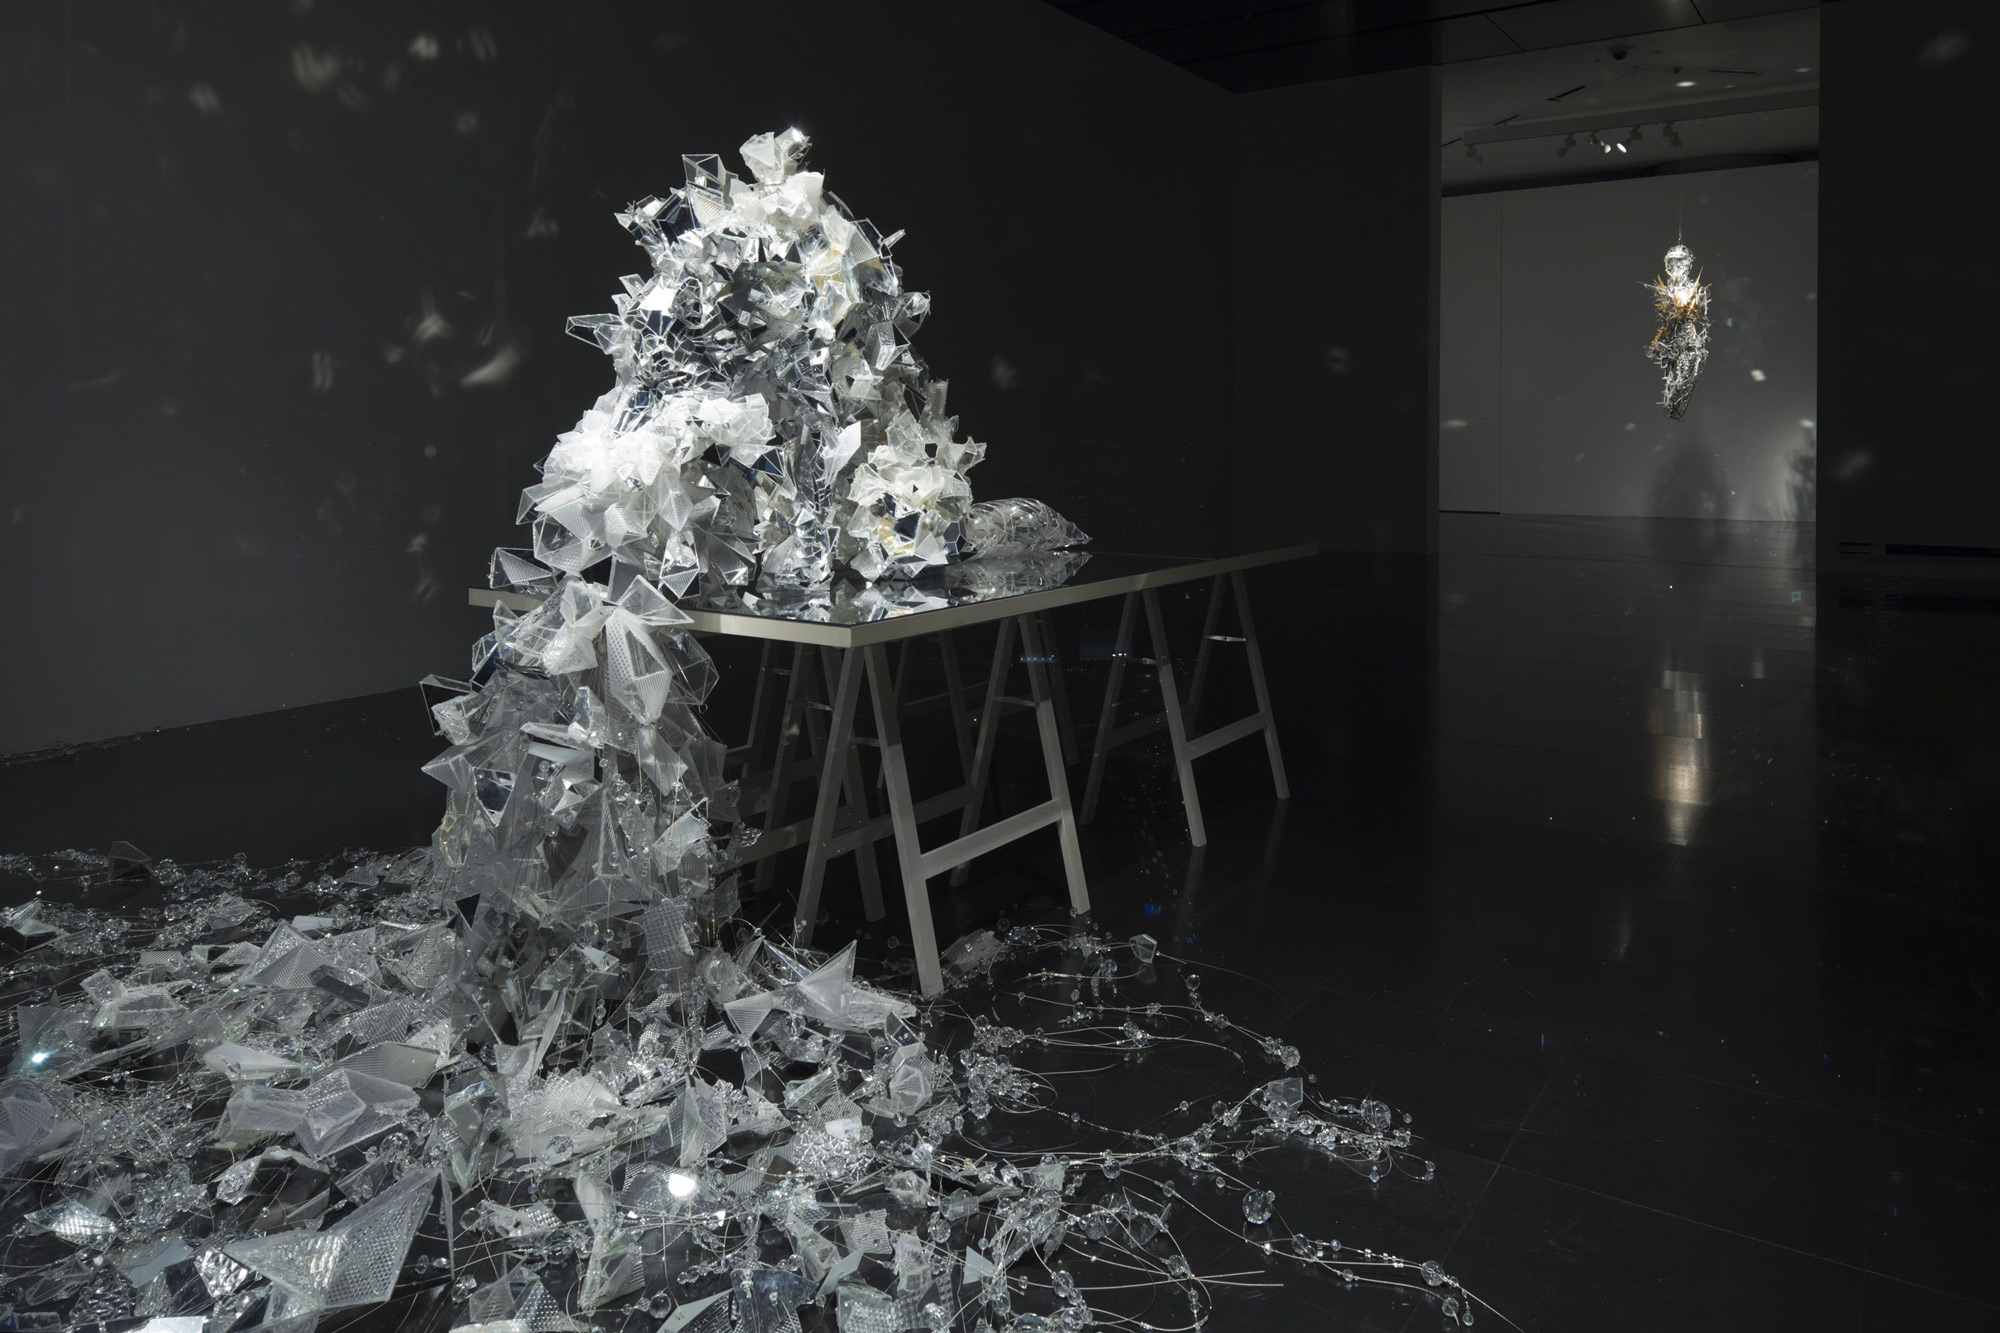 Thousands of Miniature Mirrors Dazzle and Refract in Multi-Media Sculptures by Lee Bul